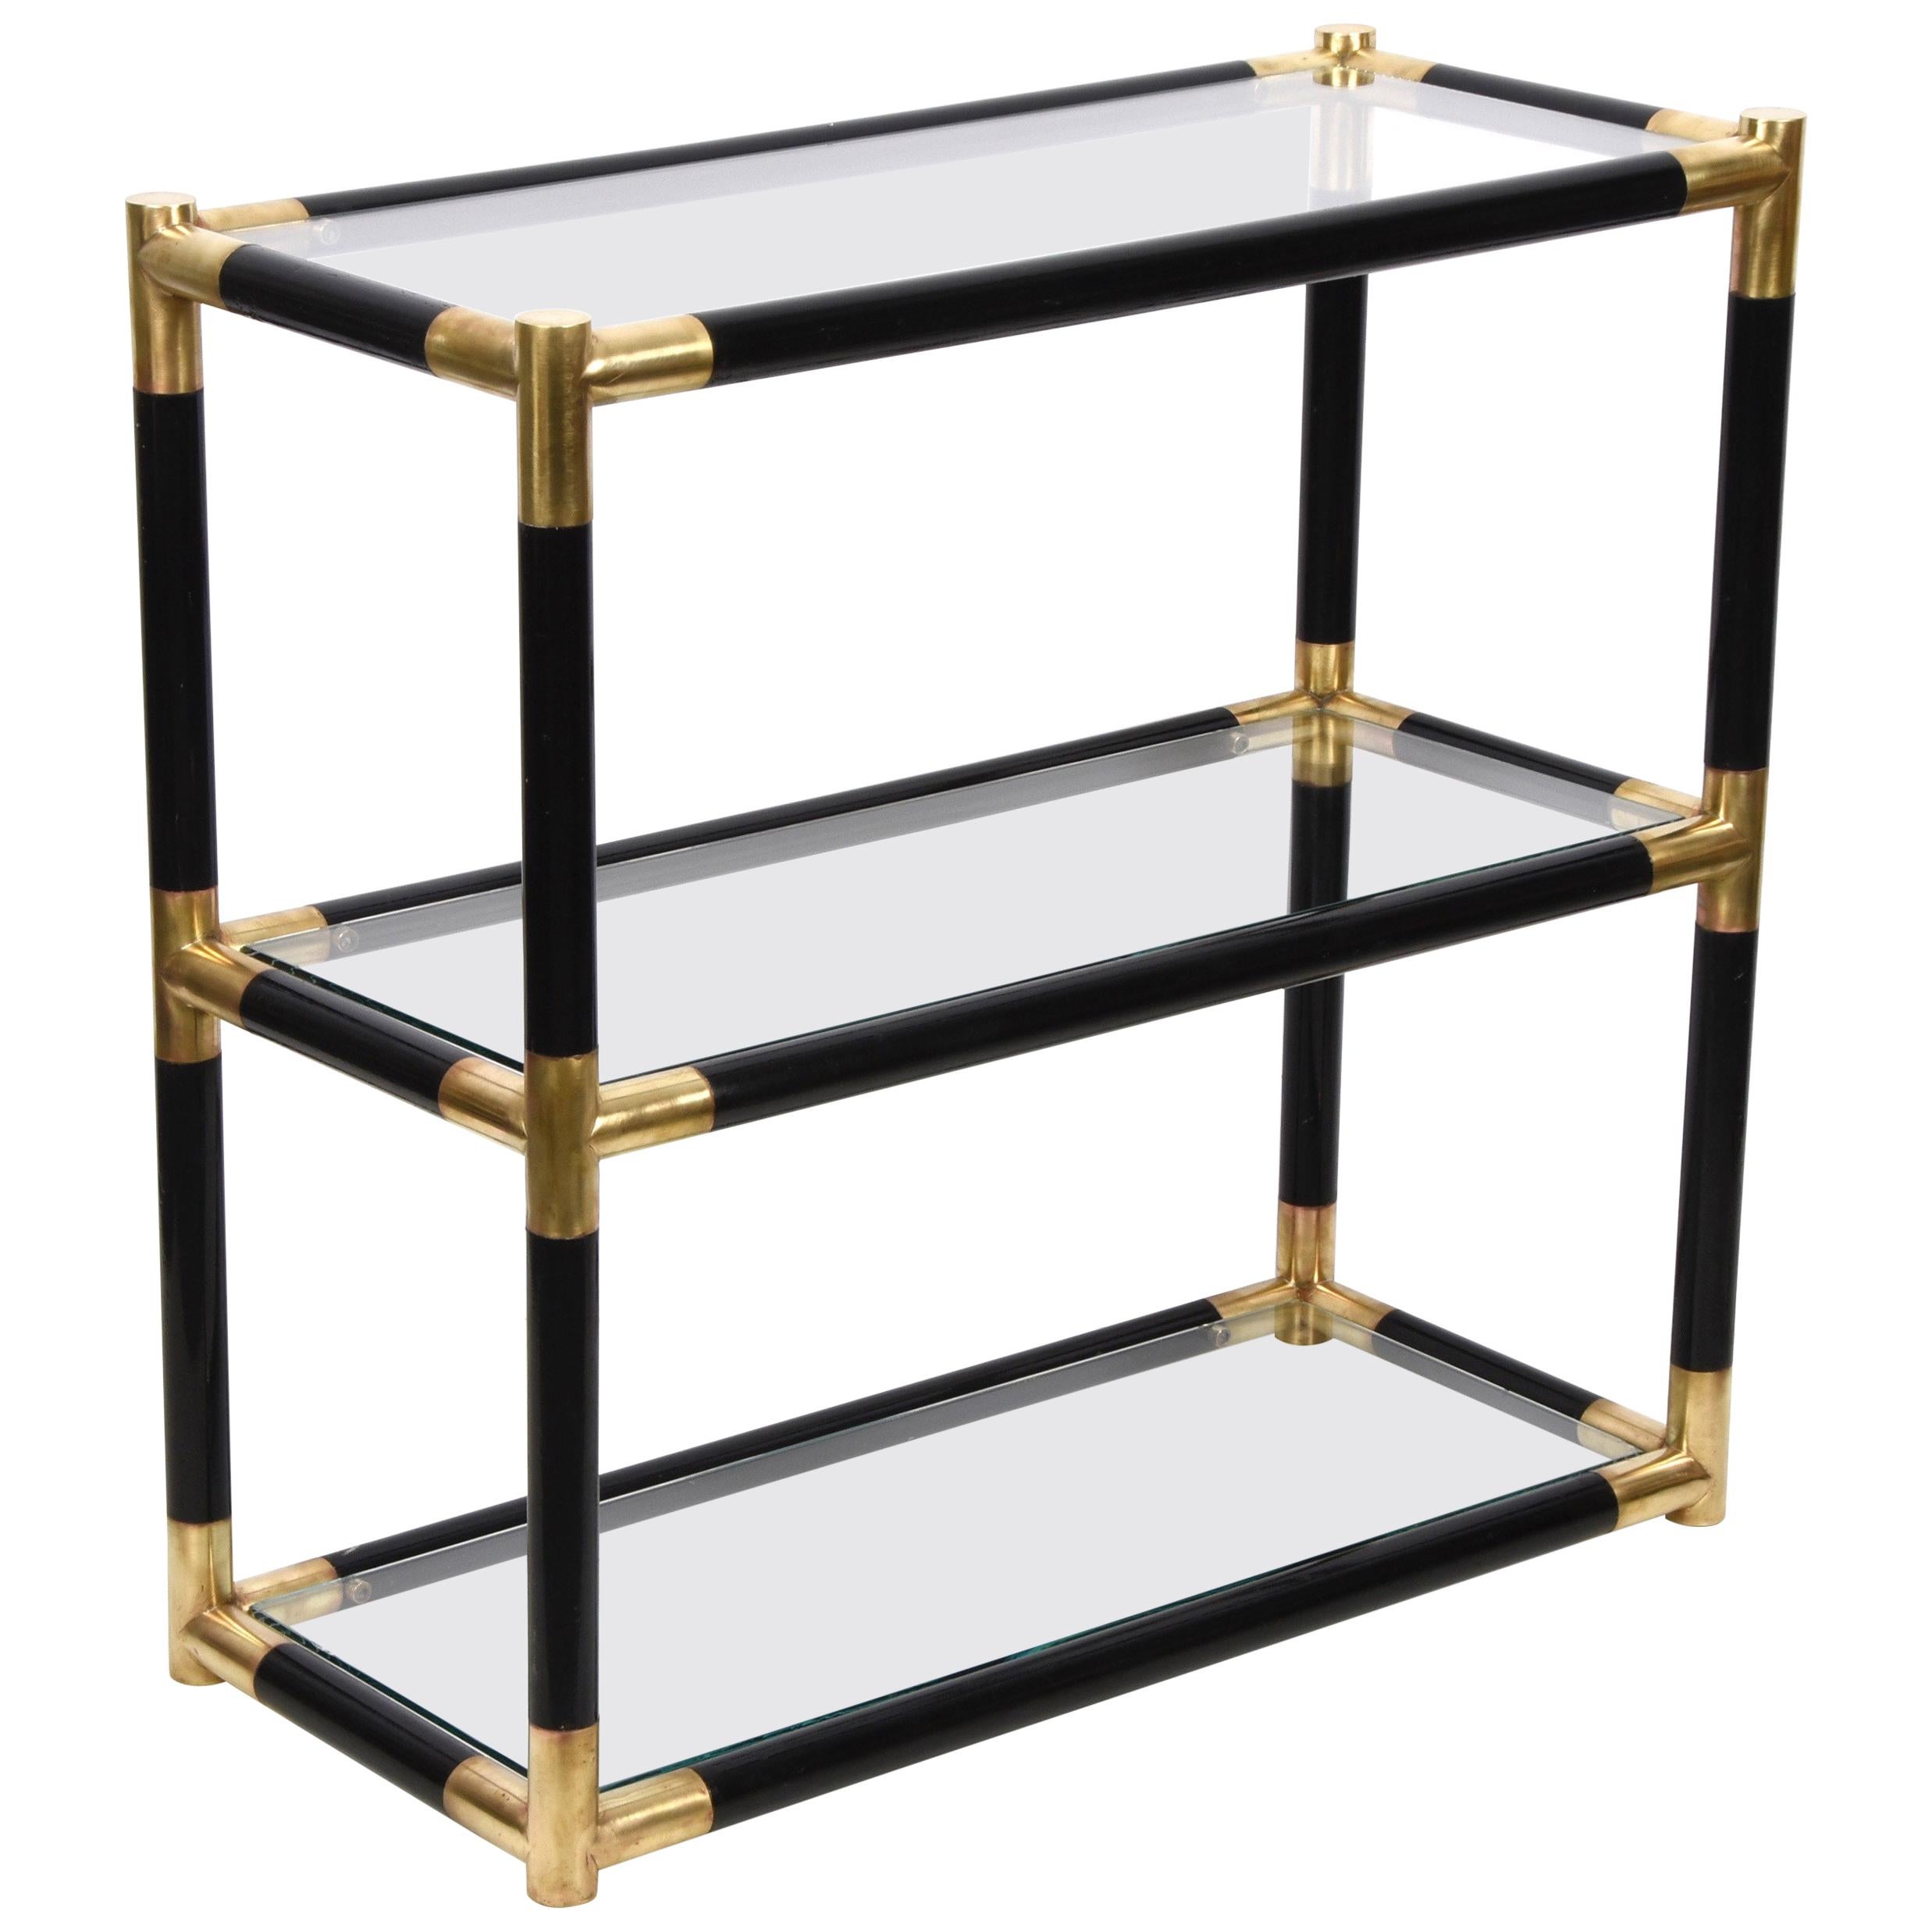 Amazing midcentury bookcase in lacquered black Bamboo with half-century brass and three crystal shelves. This fantastic bookcase was produced in Italy during the 1970s.
Attributable to Tommaso Barbi ?

This bookcase or étagère conveys elegant and